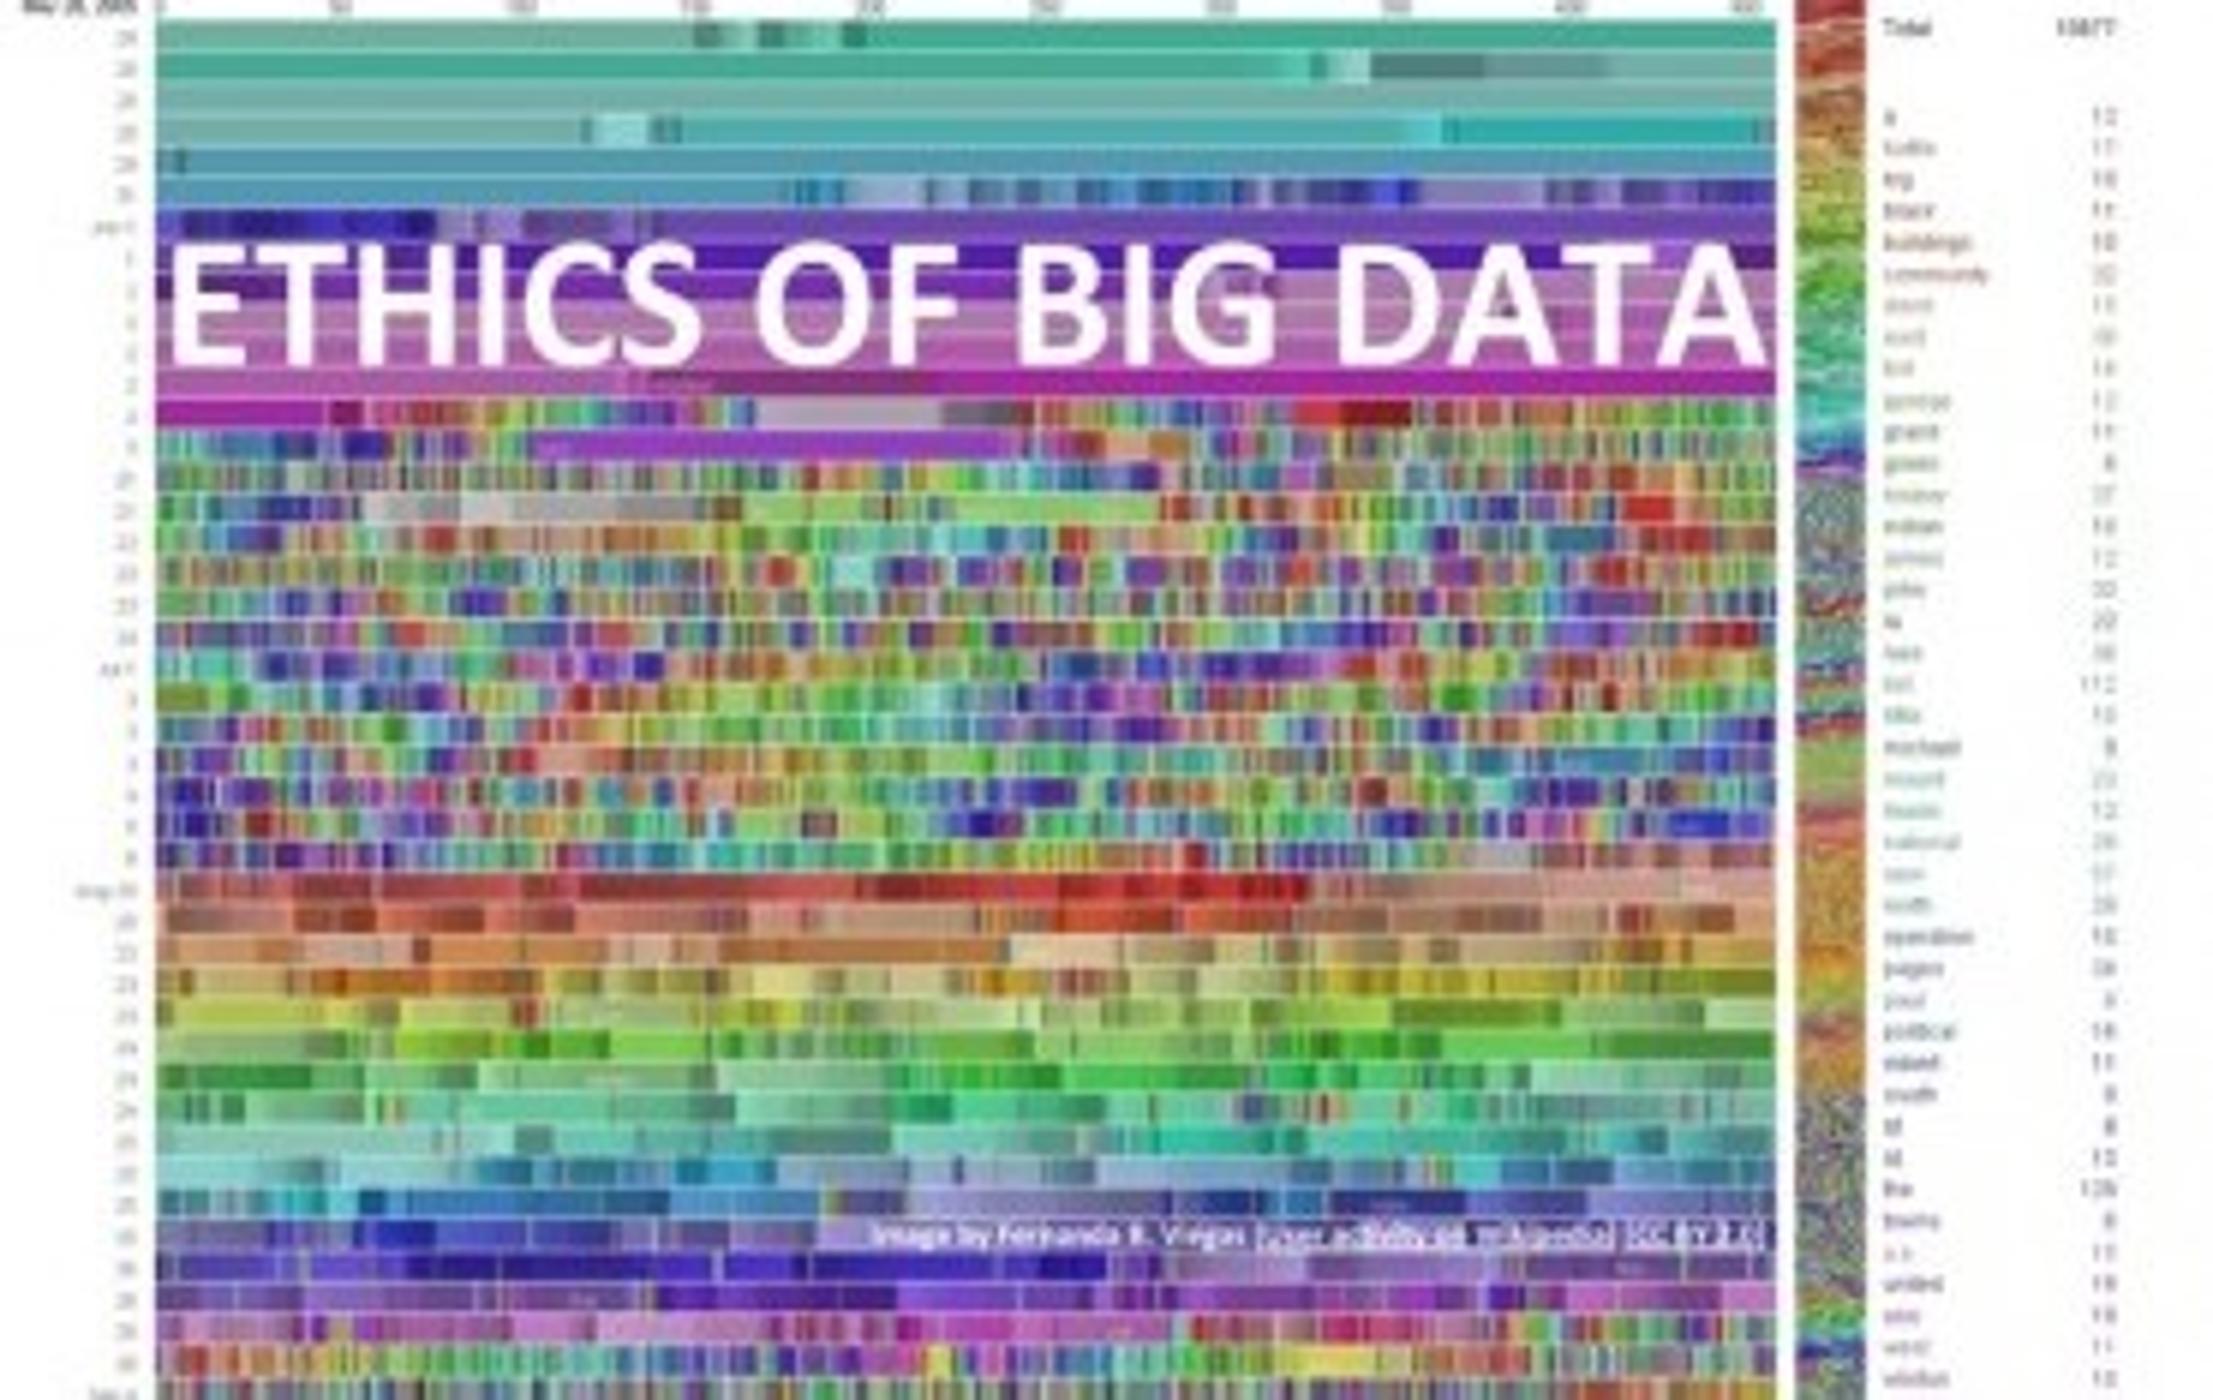 Ethics of Big Data - 31 October 2016 - Managed by an Algorithm? The rise of ‘on-demand working’ and the ‘Gig Economy’